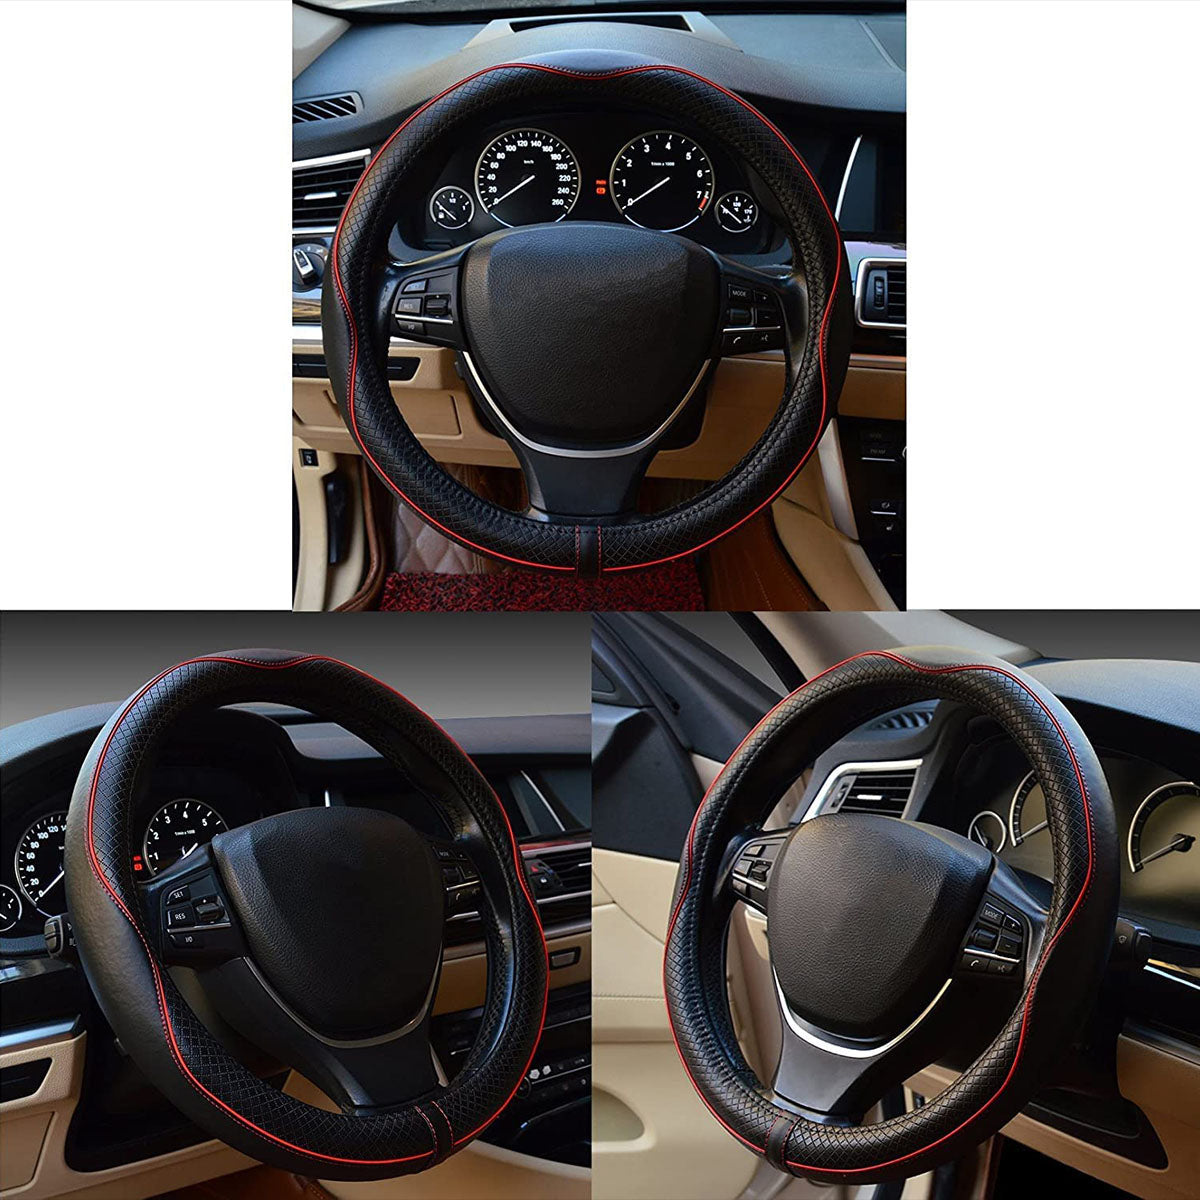 Car Steering Wheel Cover, Custom For Your Cars, Anti-Slip, Safety, Soft, Breathable, Heavy Duty, Thick, Full Surround, Sports Style, Car Accessories MT18990